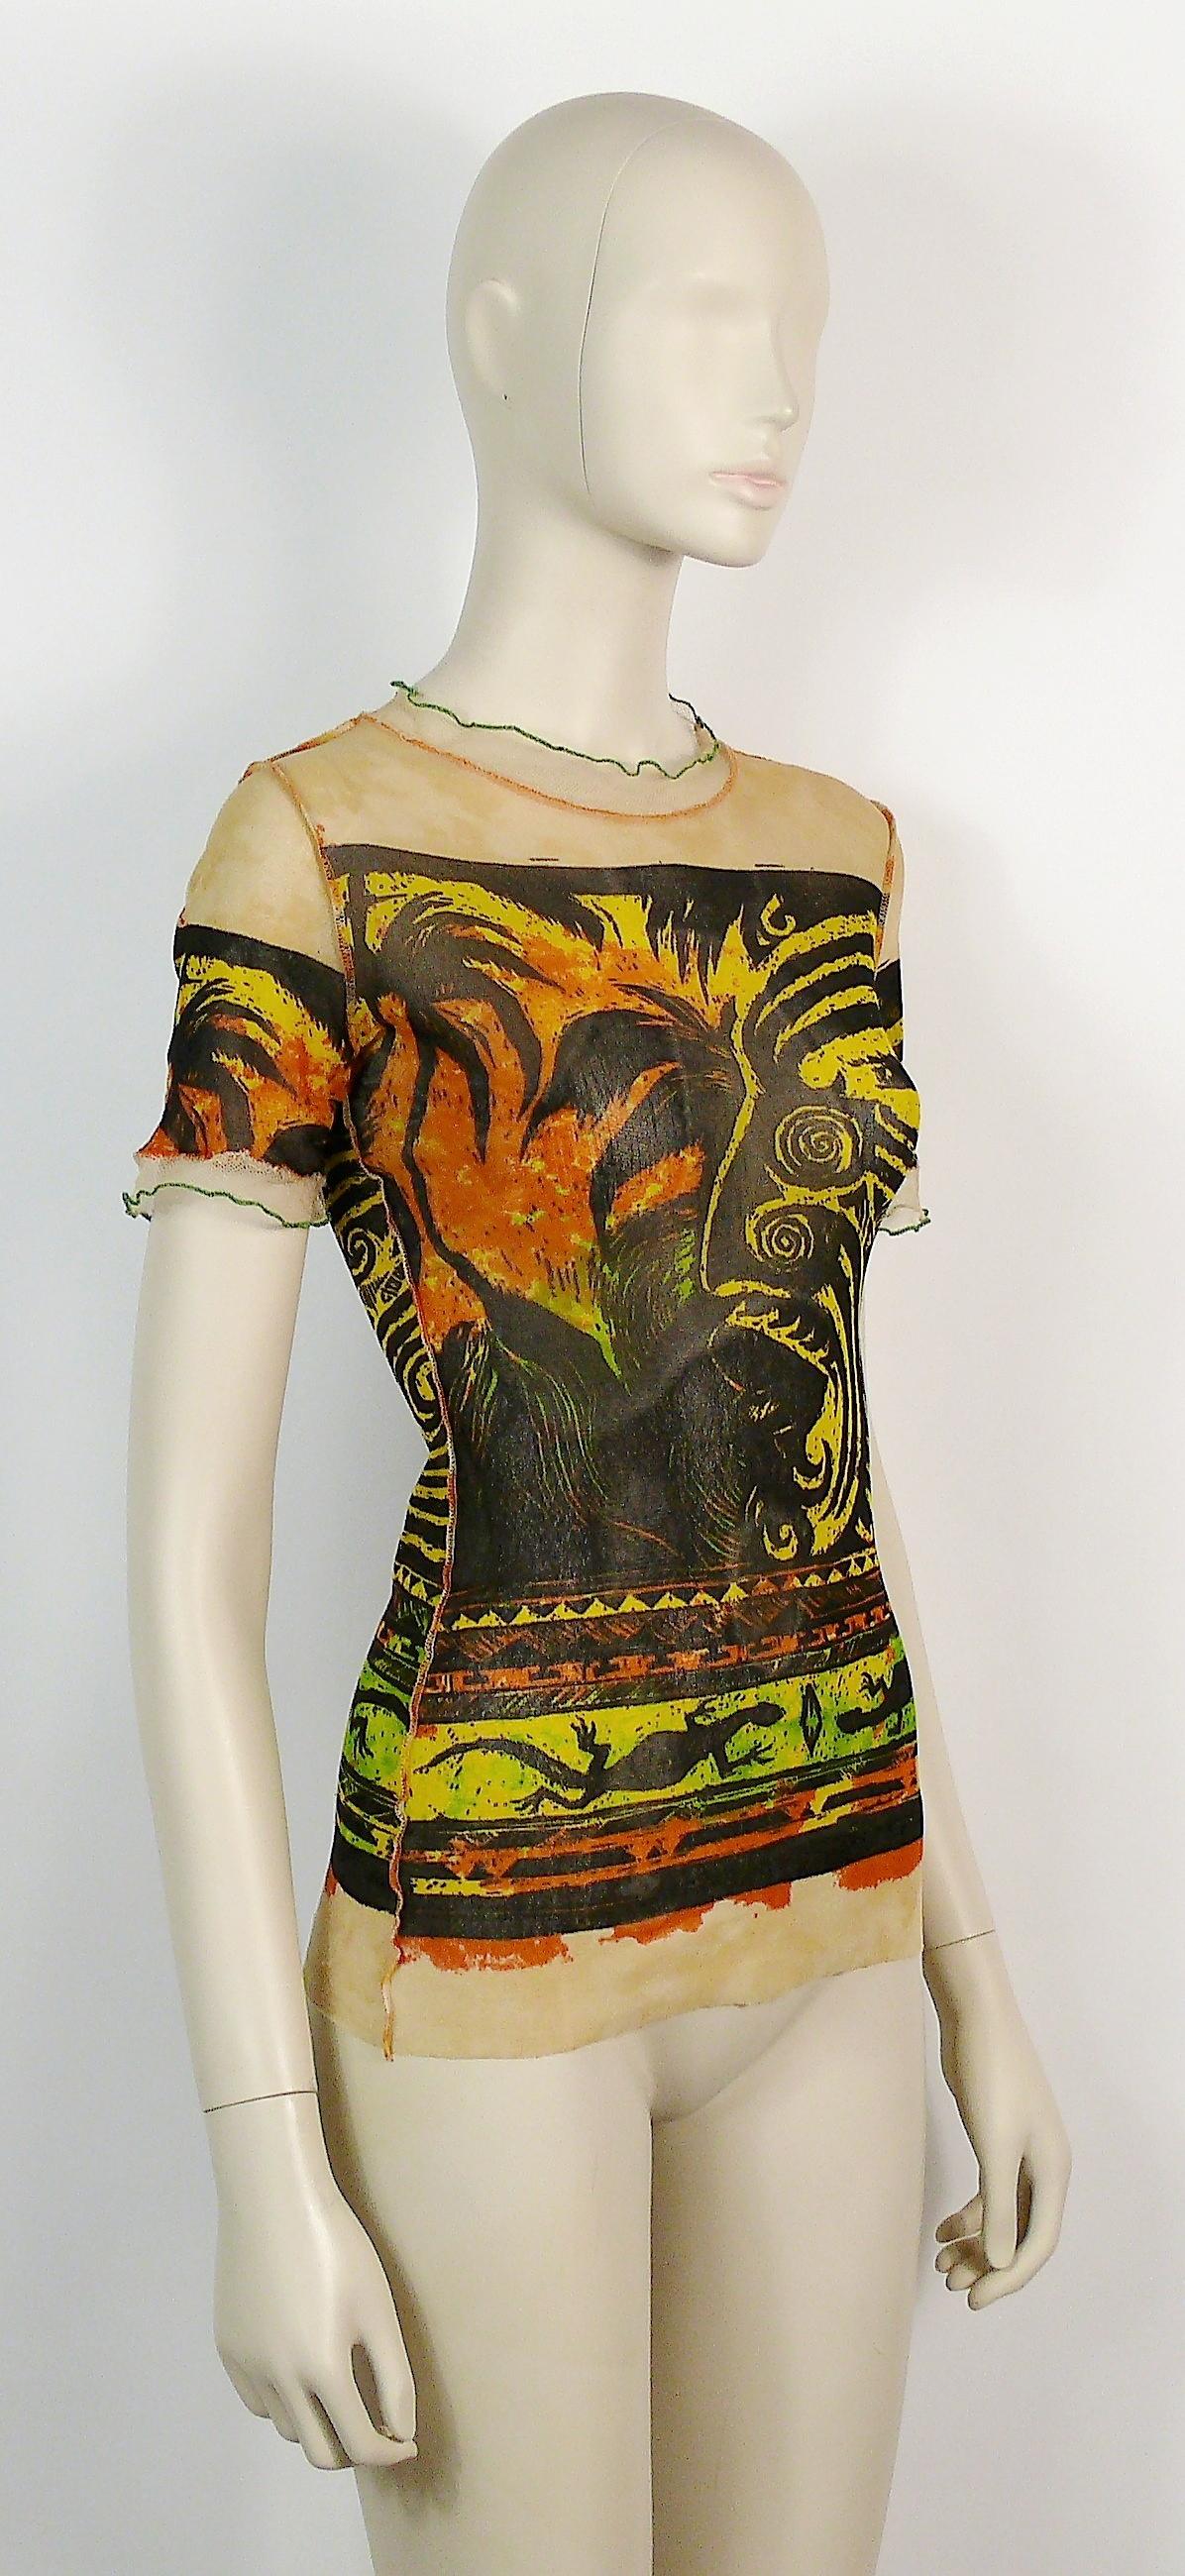 JEAN PAUL GAULTIER vintage short sleeve sheer mesh top featuring a Maori print.

Label reads JEAN PAUL GAULTIER MAILLE CLASSIQUE Paris.
Made in Italy.

Size label reads : M.
Please check measurements.

Missing composition tag.

Indicative